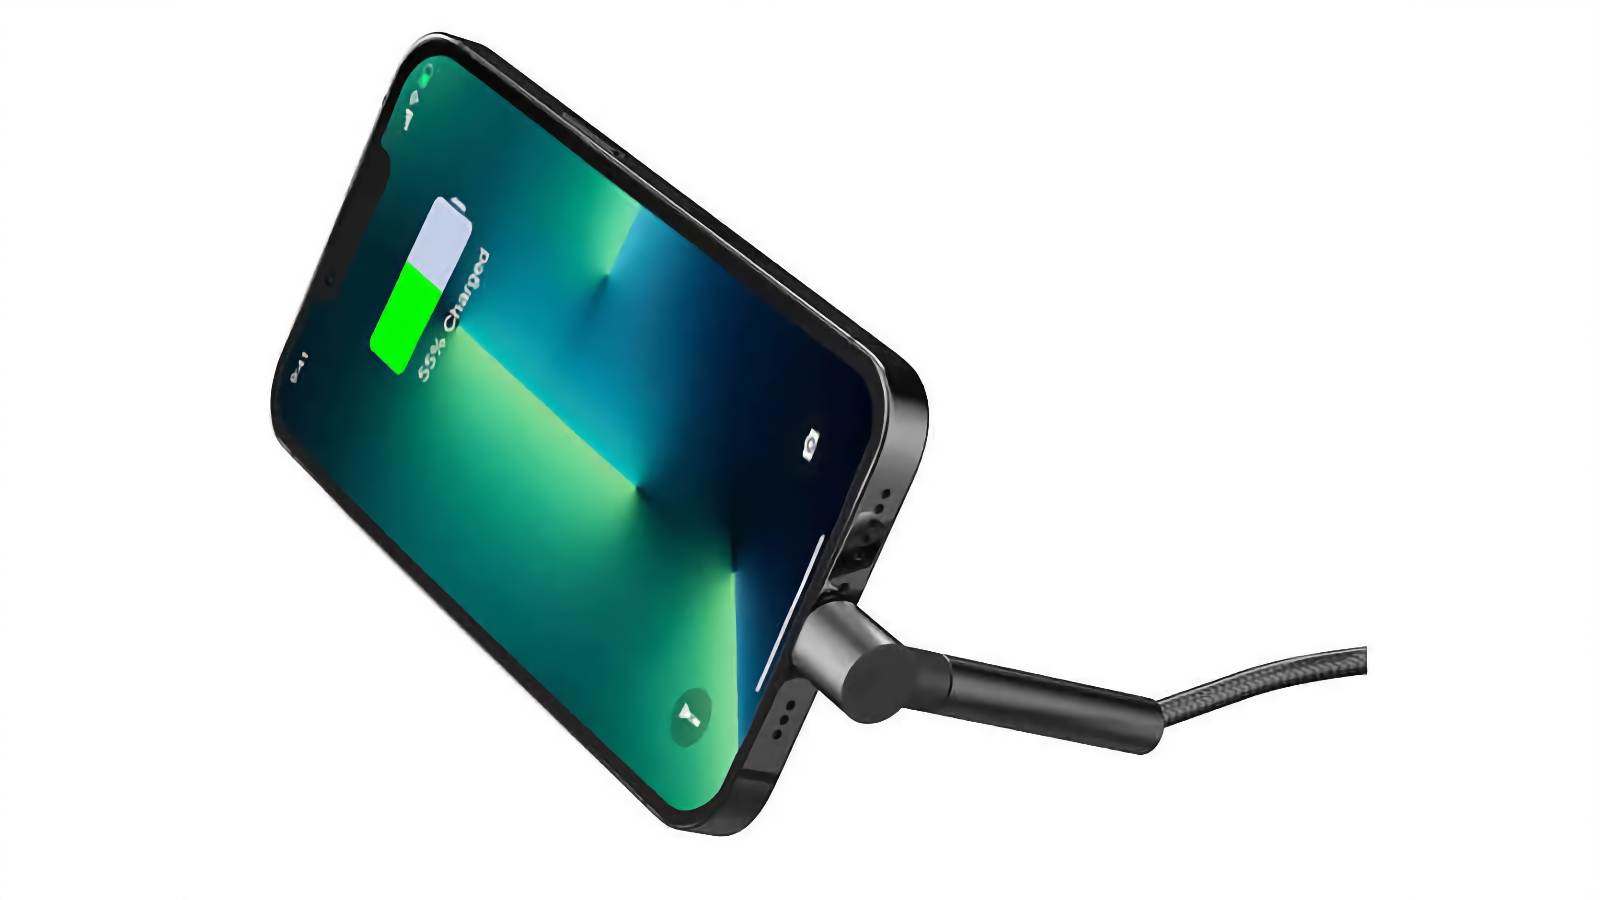 RapidX Lightning Charging Cable Stand - Best Cable/Stand hybrid